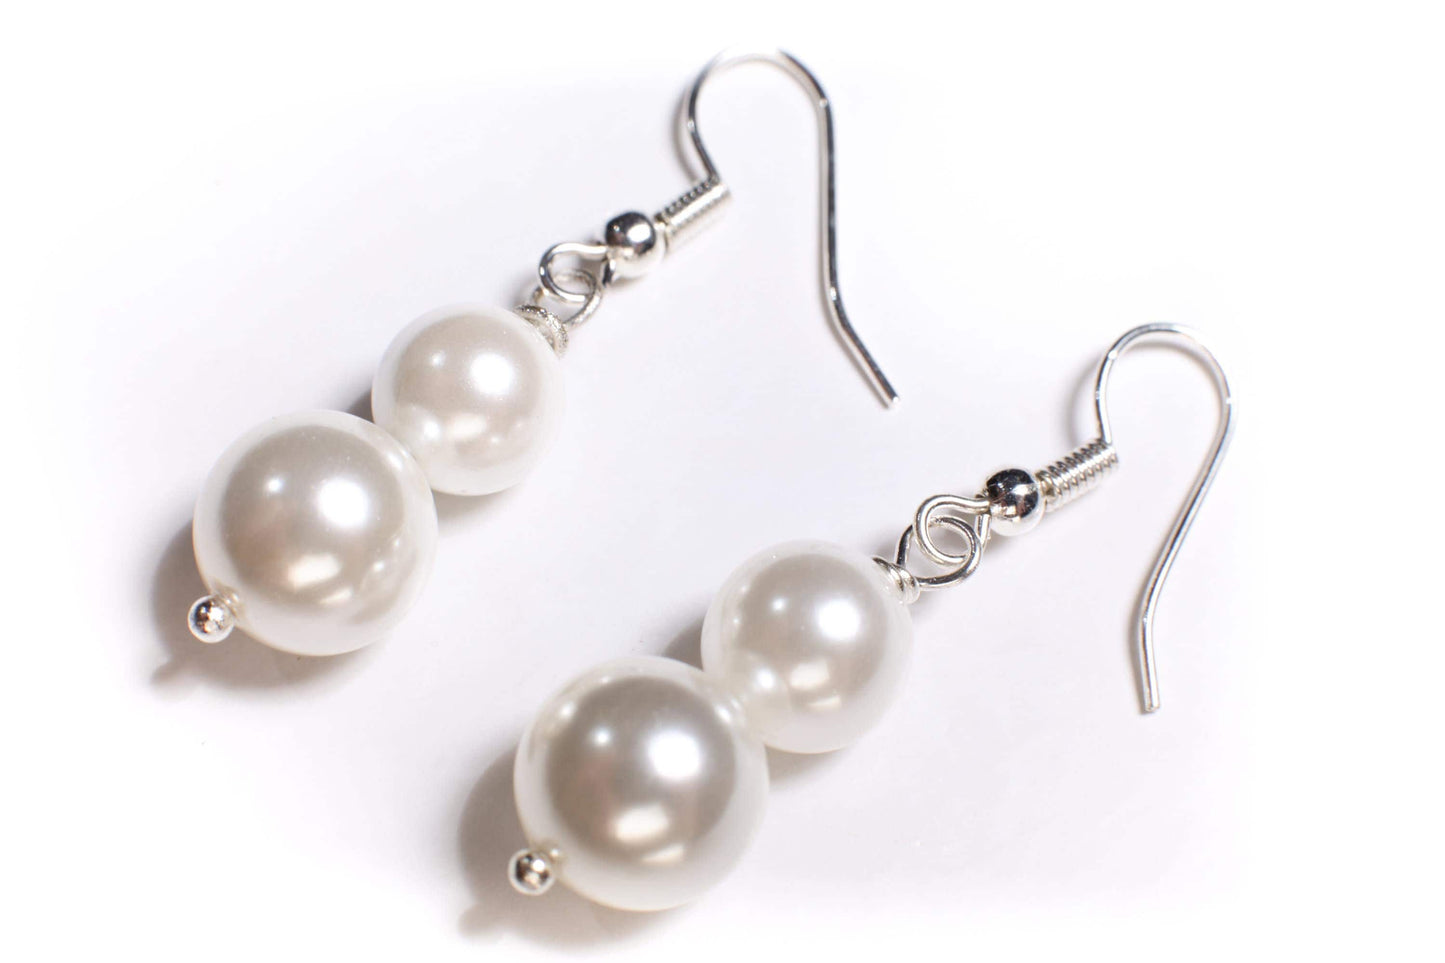 Seashell South Sea Pearl 8mm &10mm Round Dangling Pearl in 925 Sterling Silver Earrings, Bridal, Gift for Her